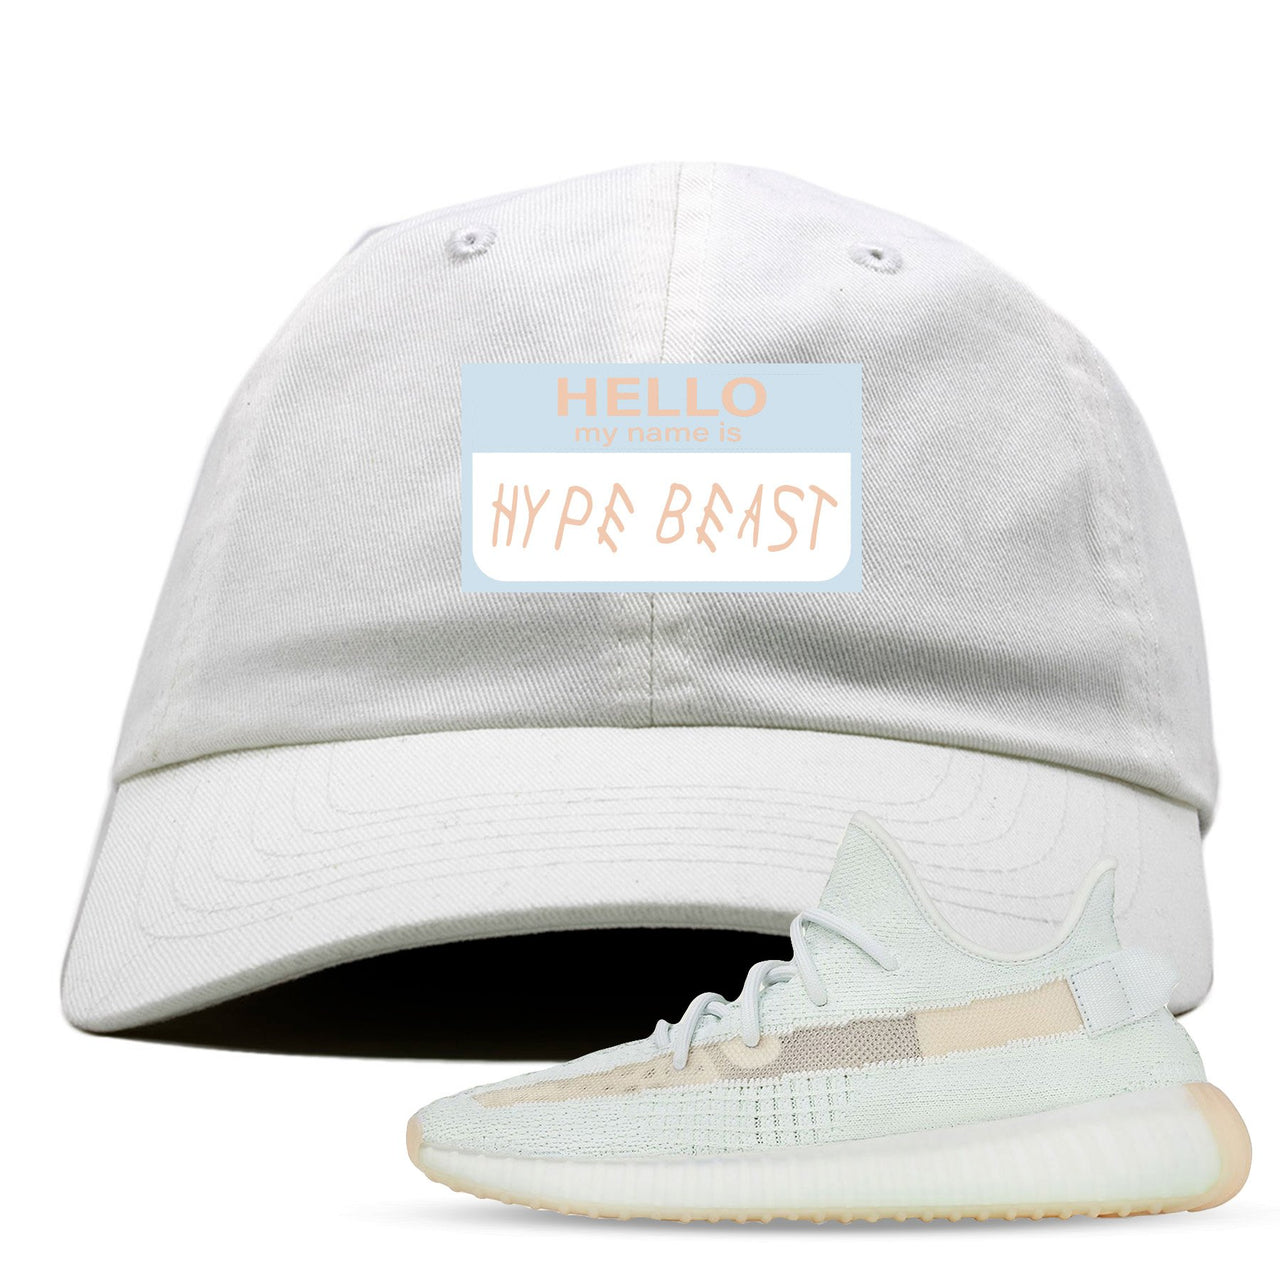 Hyperspace 350s Dad Hat | Hello My Name Is Hype Beast Woe, White